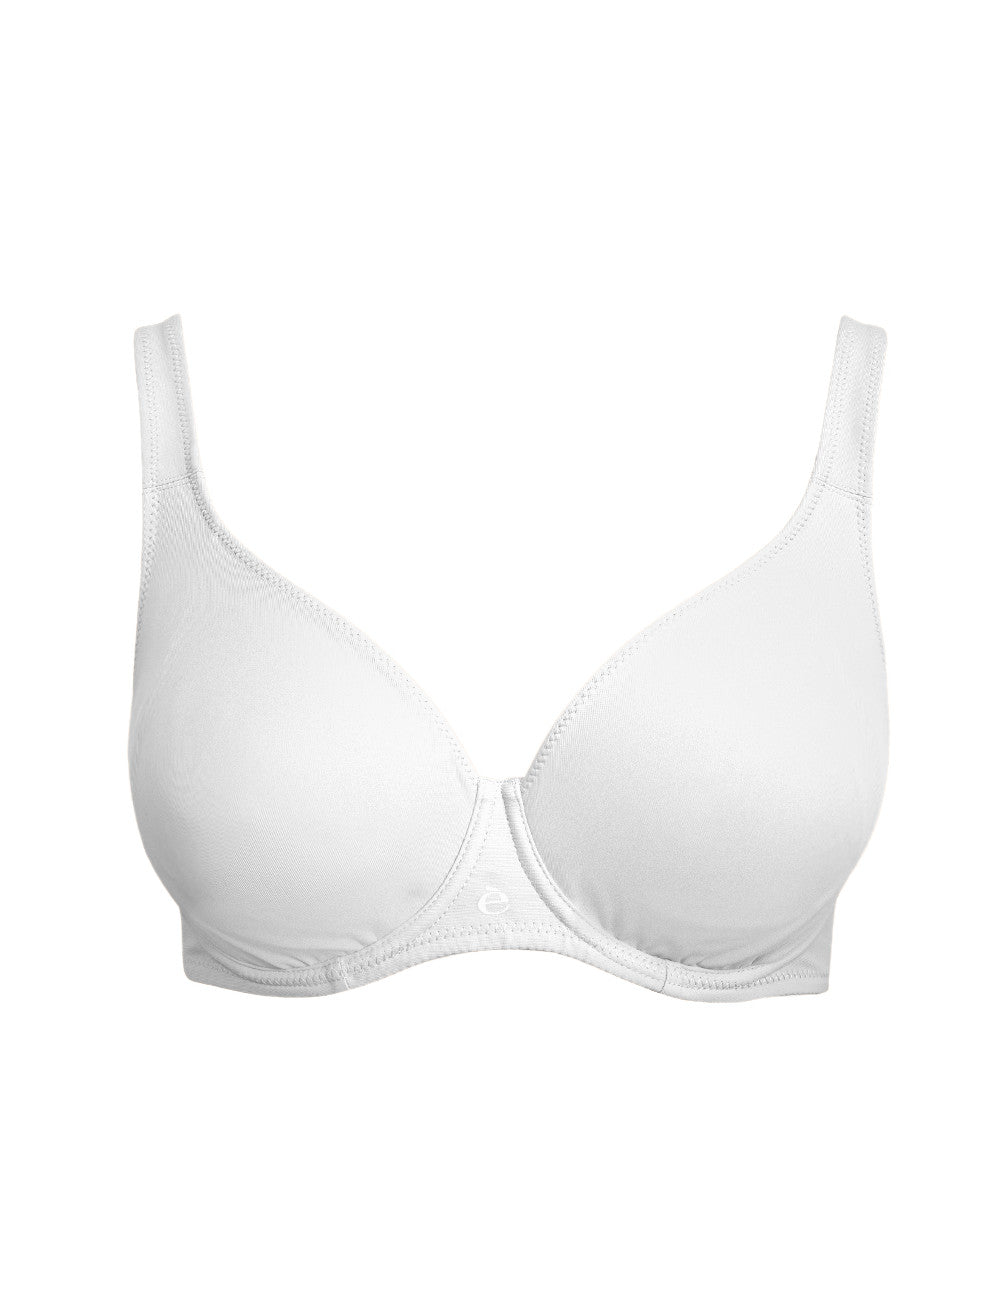 Sielei PLUS 2546 Non-wired bra CUP C: for sale at 16.99€ on